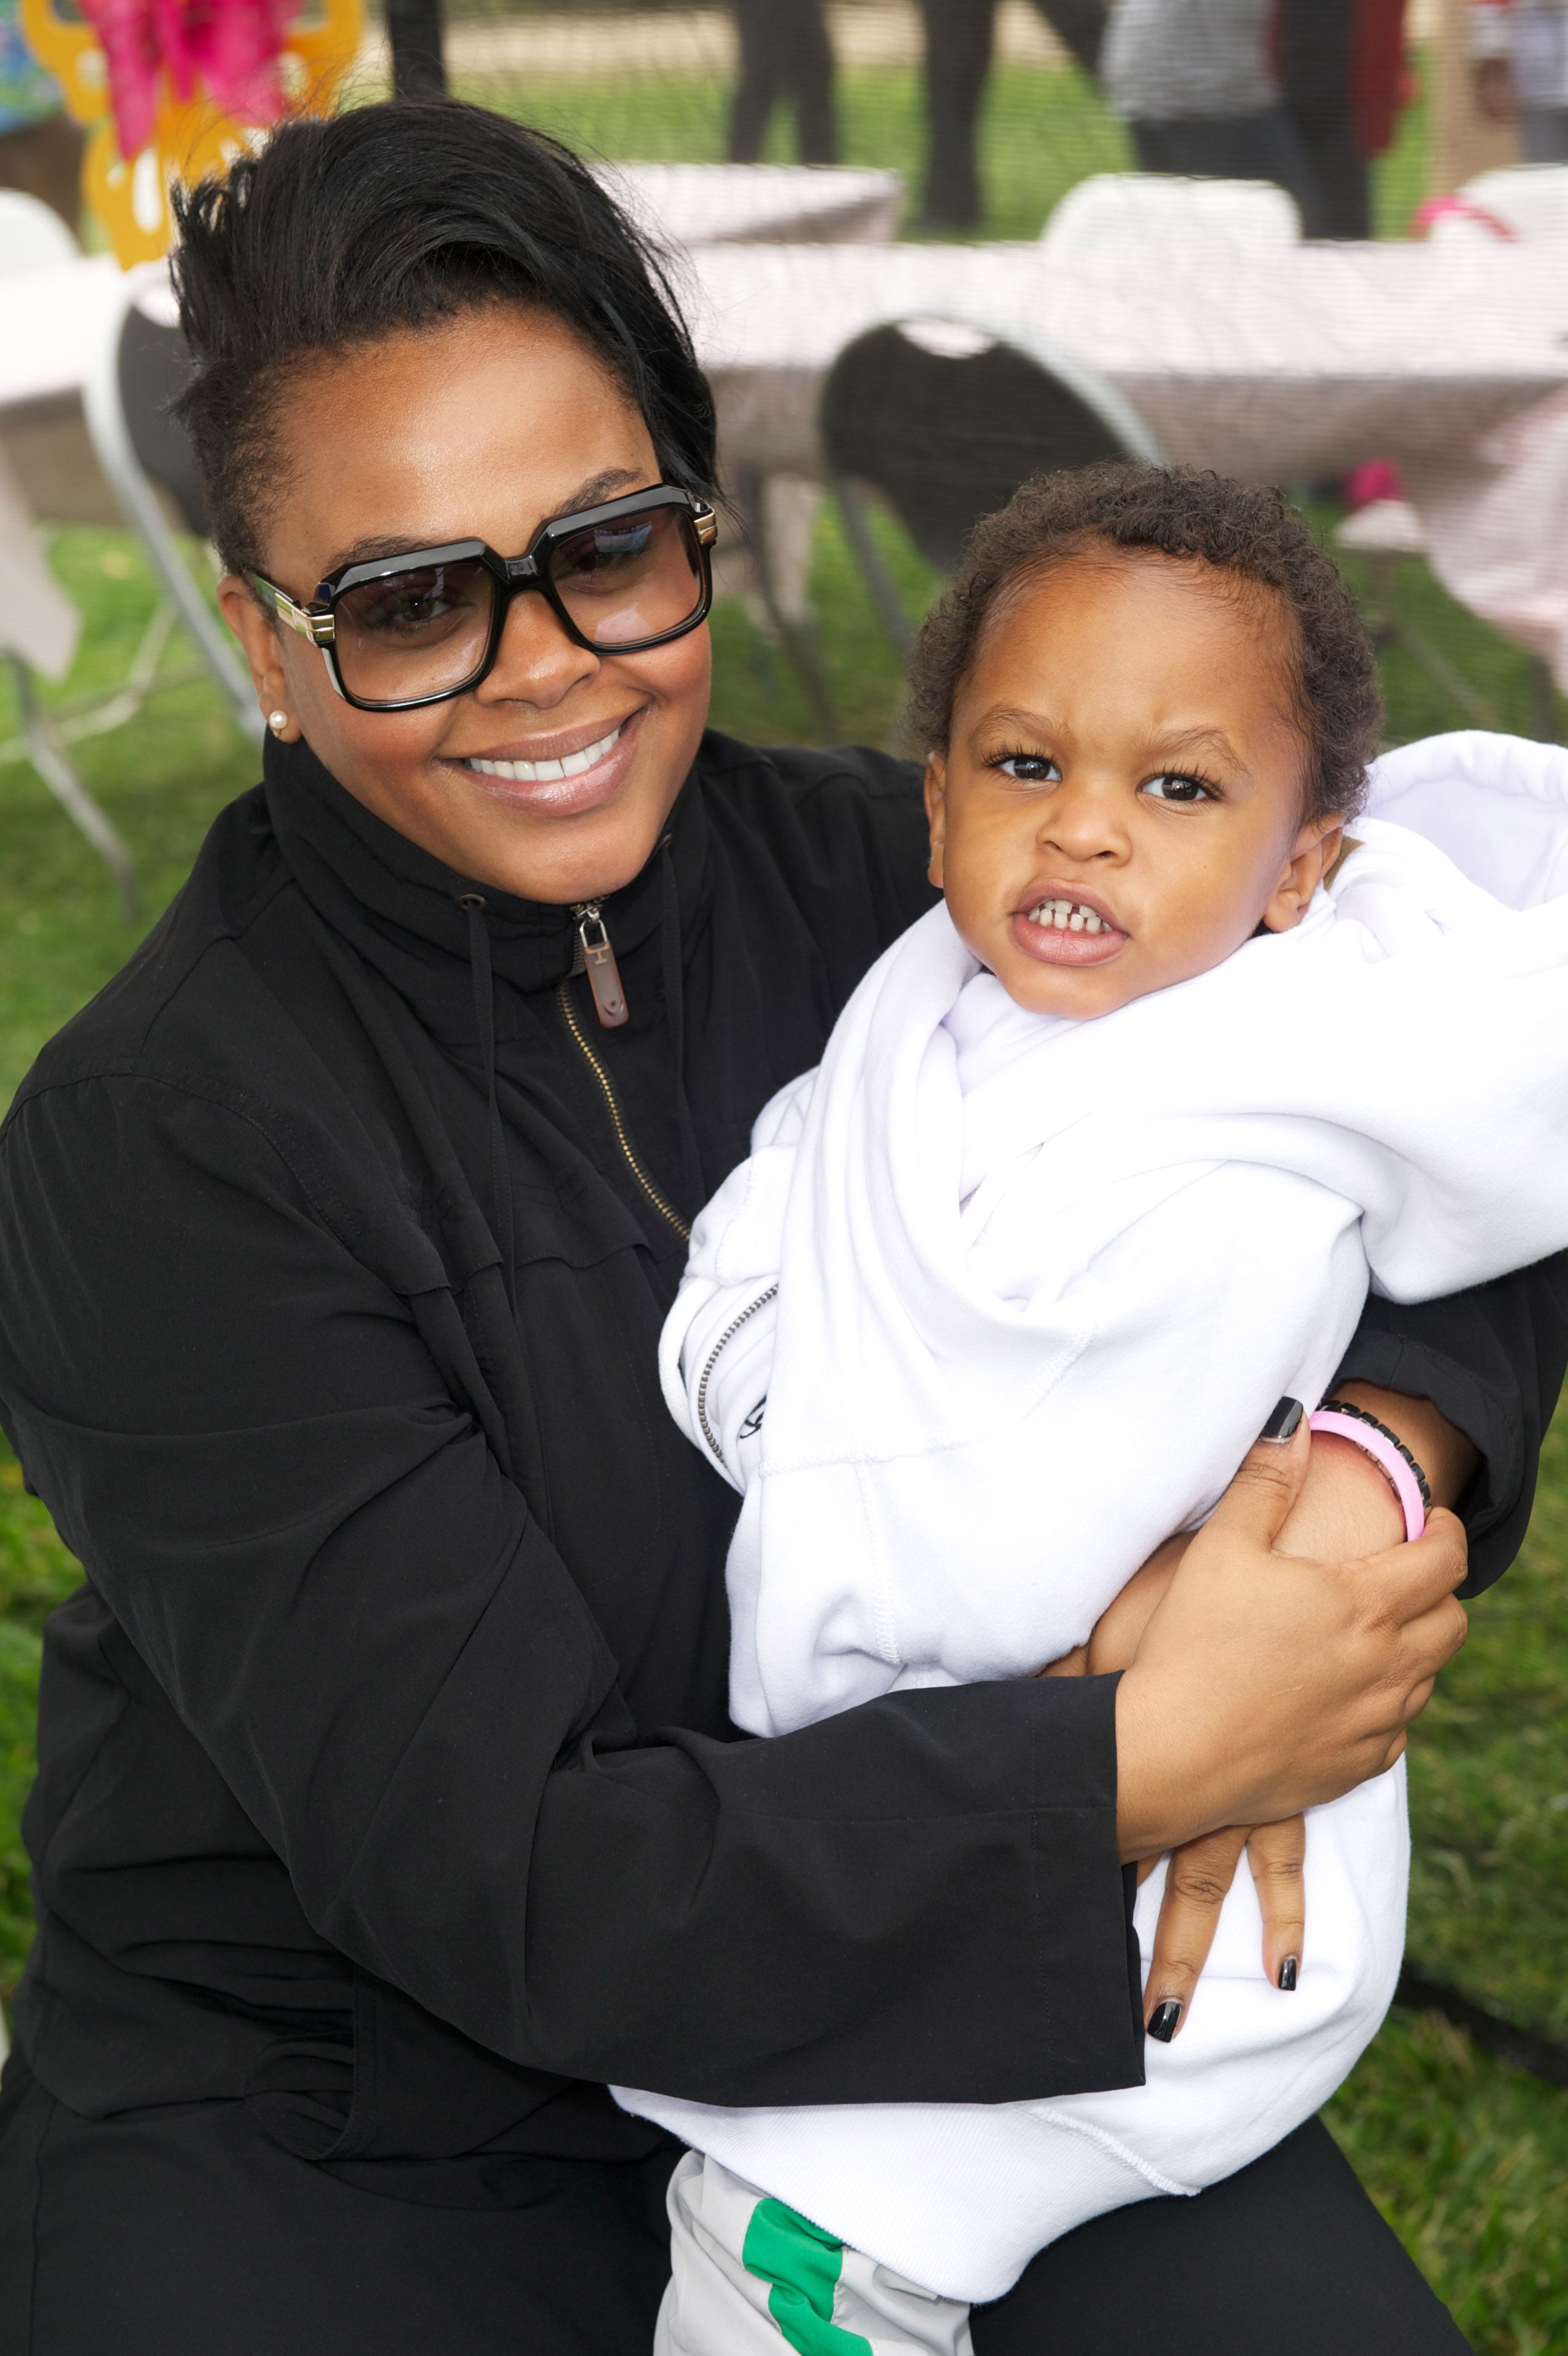 Jill Scott and her son Jett Hamilton Roberts attend the Brittiana "Smile For Life" Run/Walk on May 14, 2011, in Los Angeles, California | Source: Getty Images (Photo by Earl Gibson III/FilmMagic